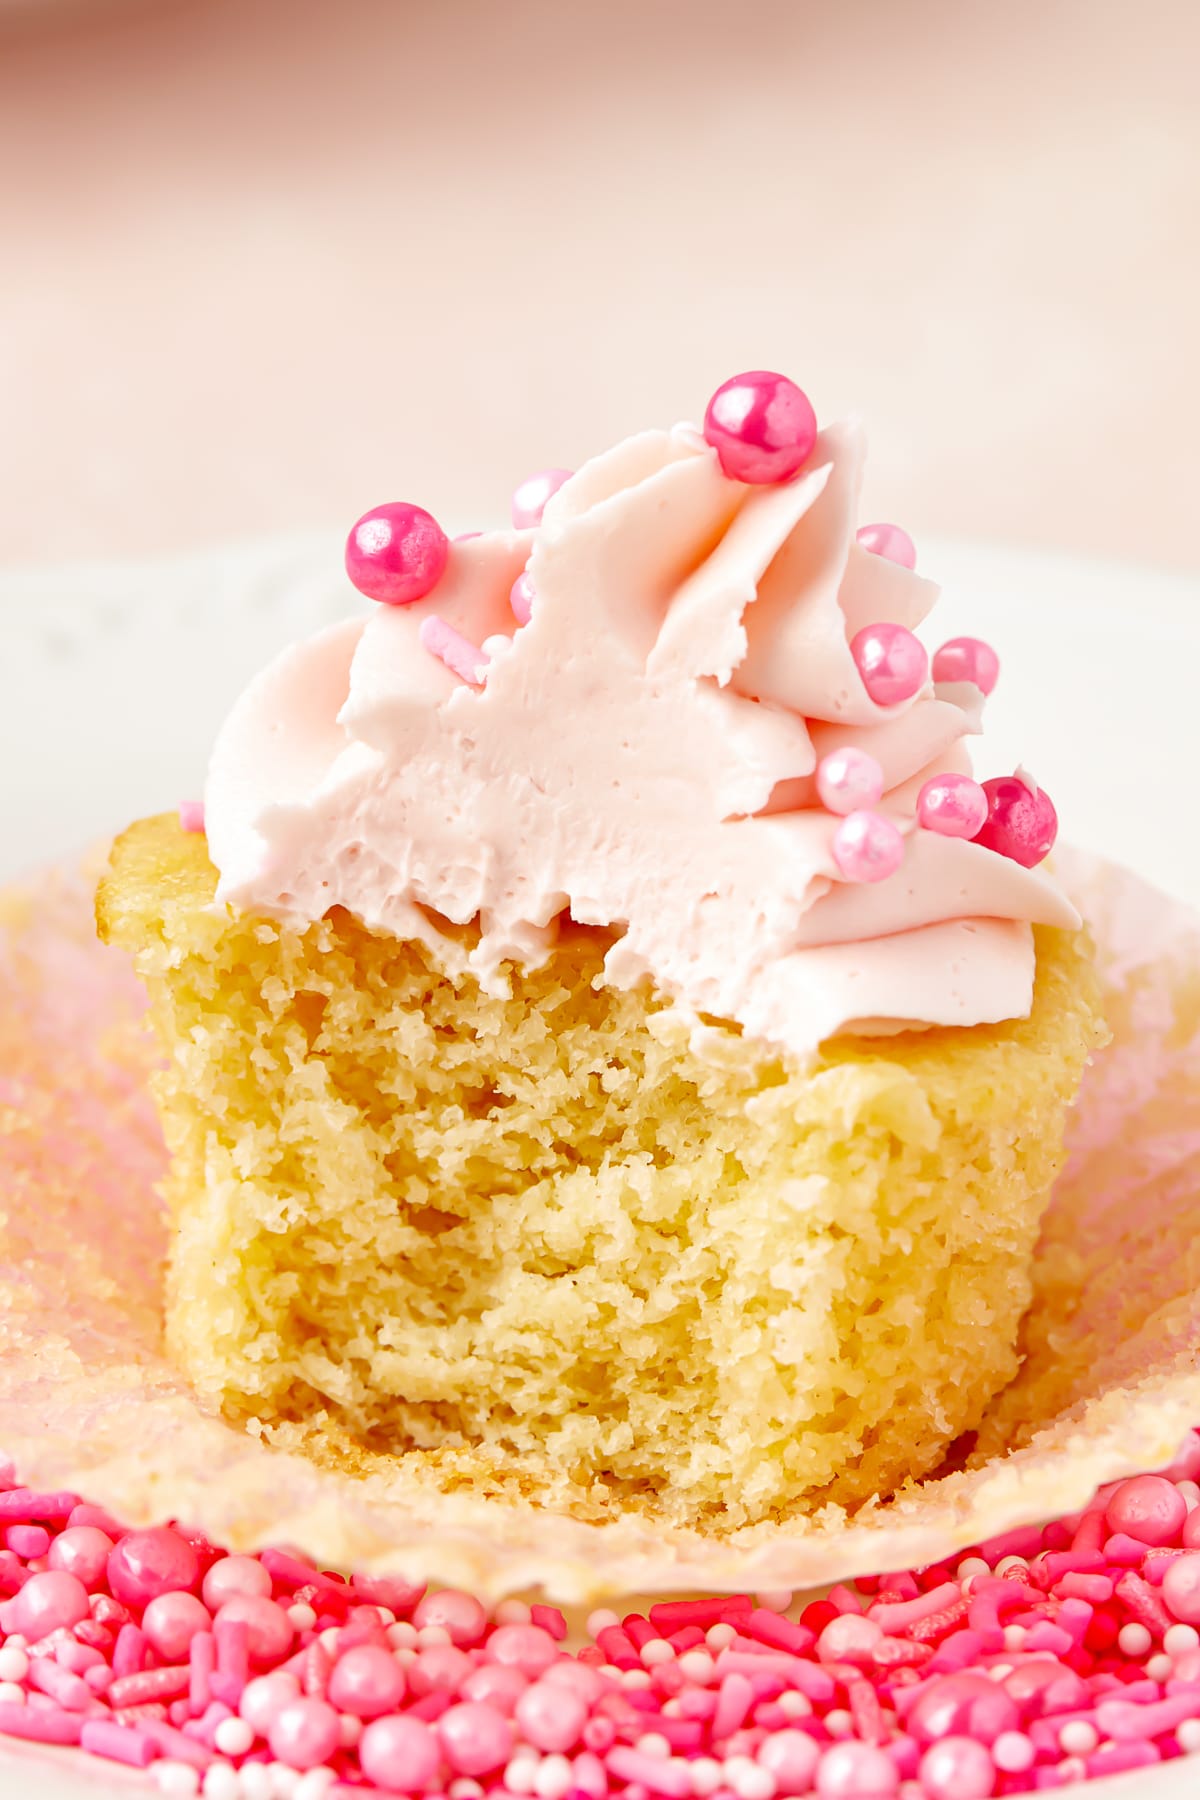 Photo showing an interior shot of Valentine's Day Cupcakes with a bite taken out. Pink frosting and pink sprinkles on the cupcake. Sittin on a white plate with more pink sprinkles surrounding the cupcake.